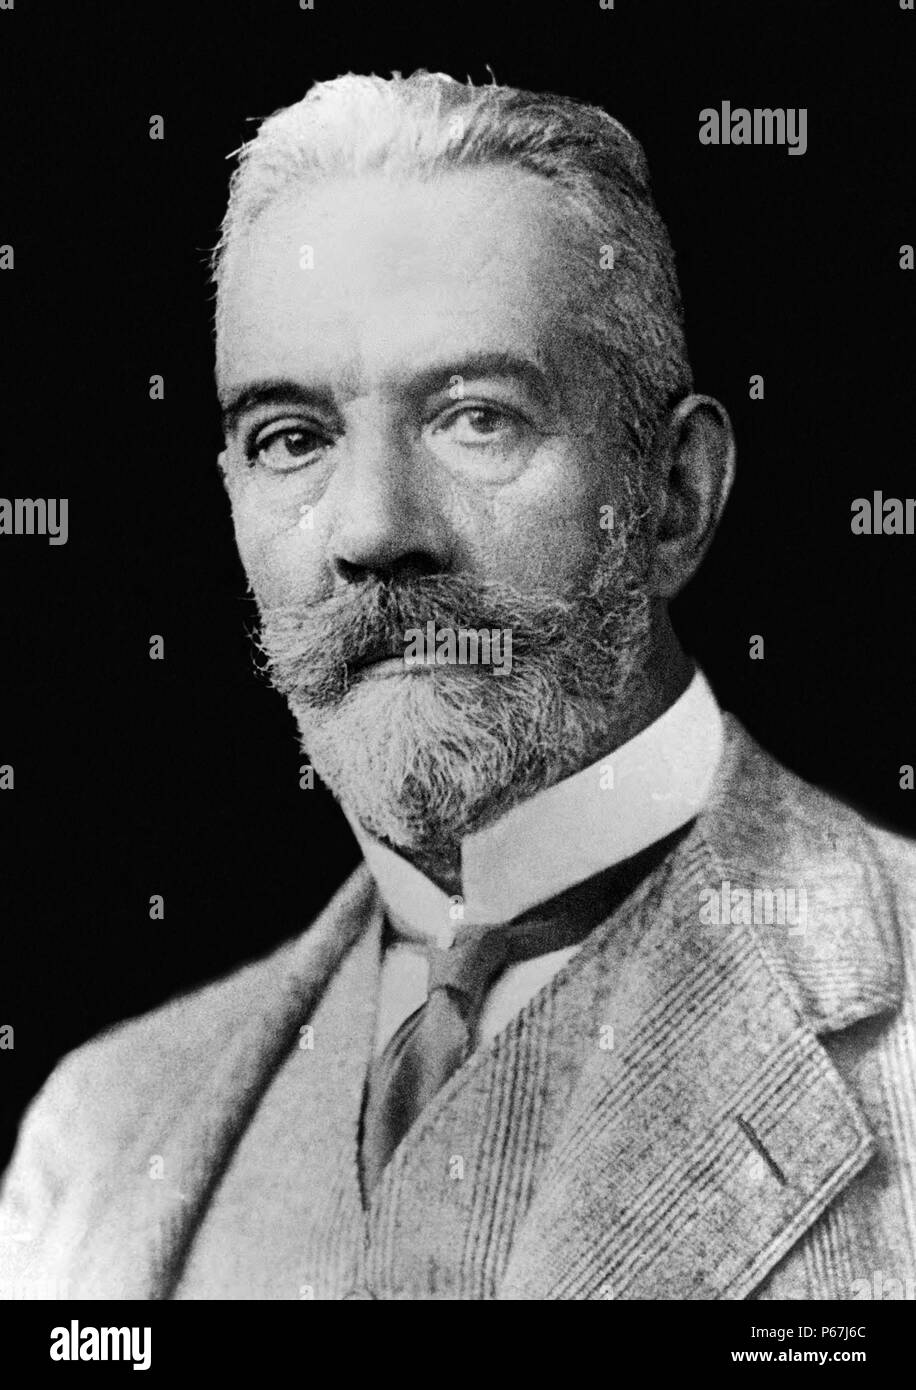 Theobald von Bethmann Hollweg (1856 – 1 January 1921) German Chancellor of the German Empire from 1909 to 1917. Stock Photo